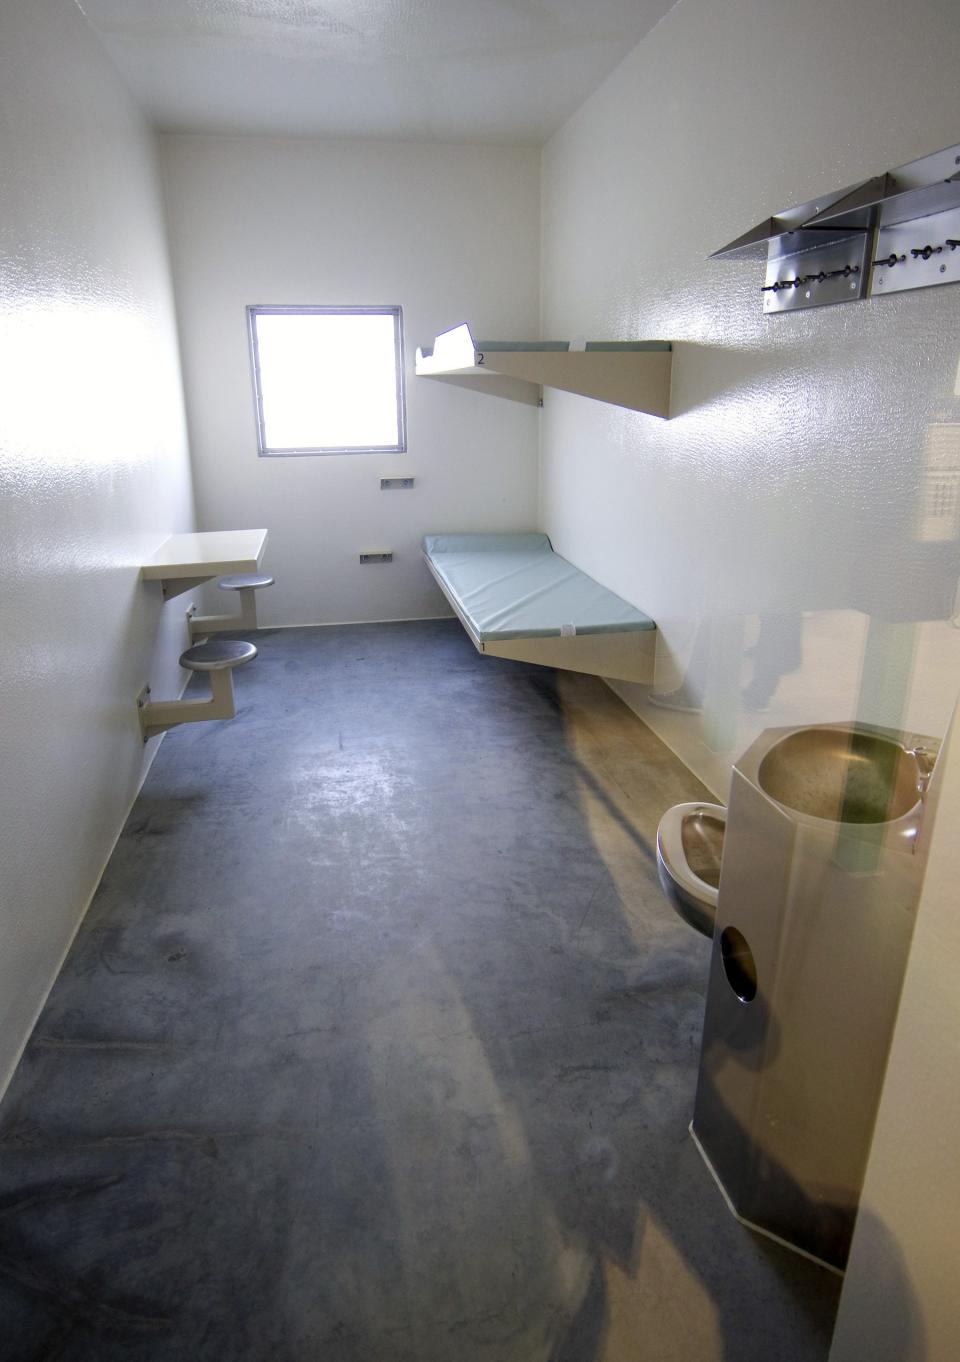 A double-bunked cell is pictured at the new Toronto South Detention Centre